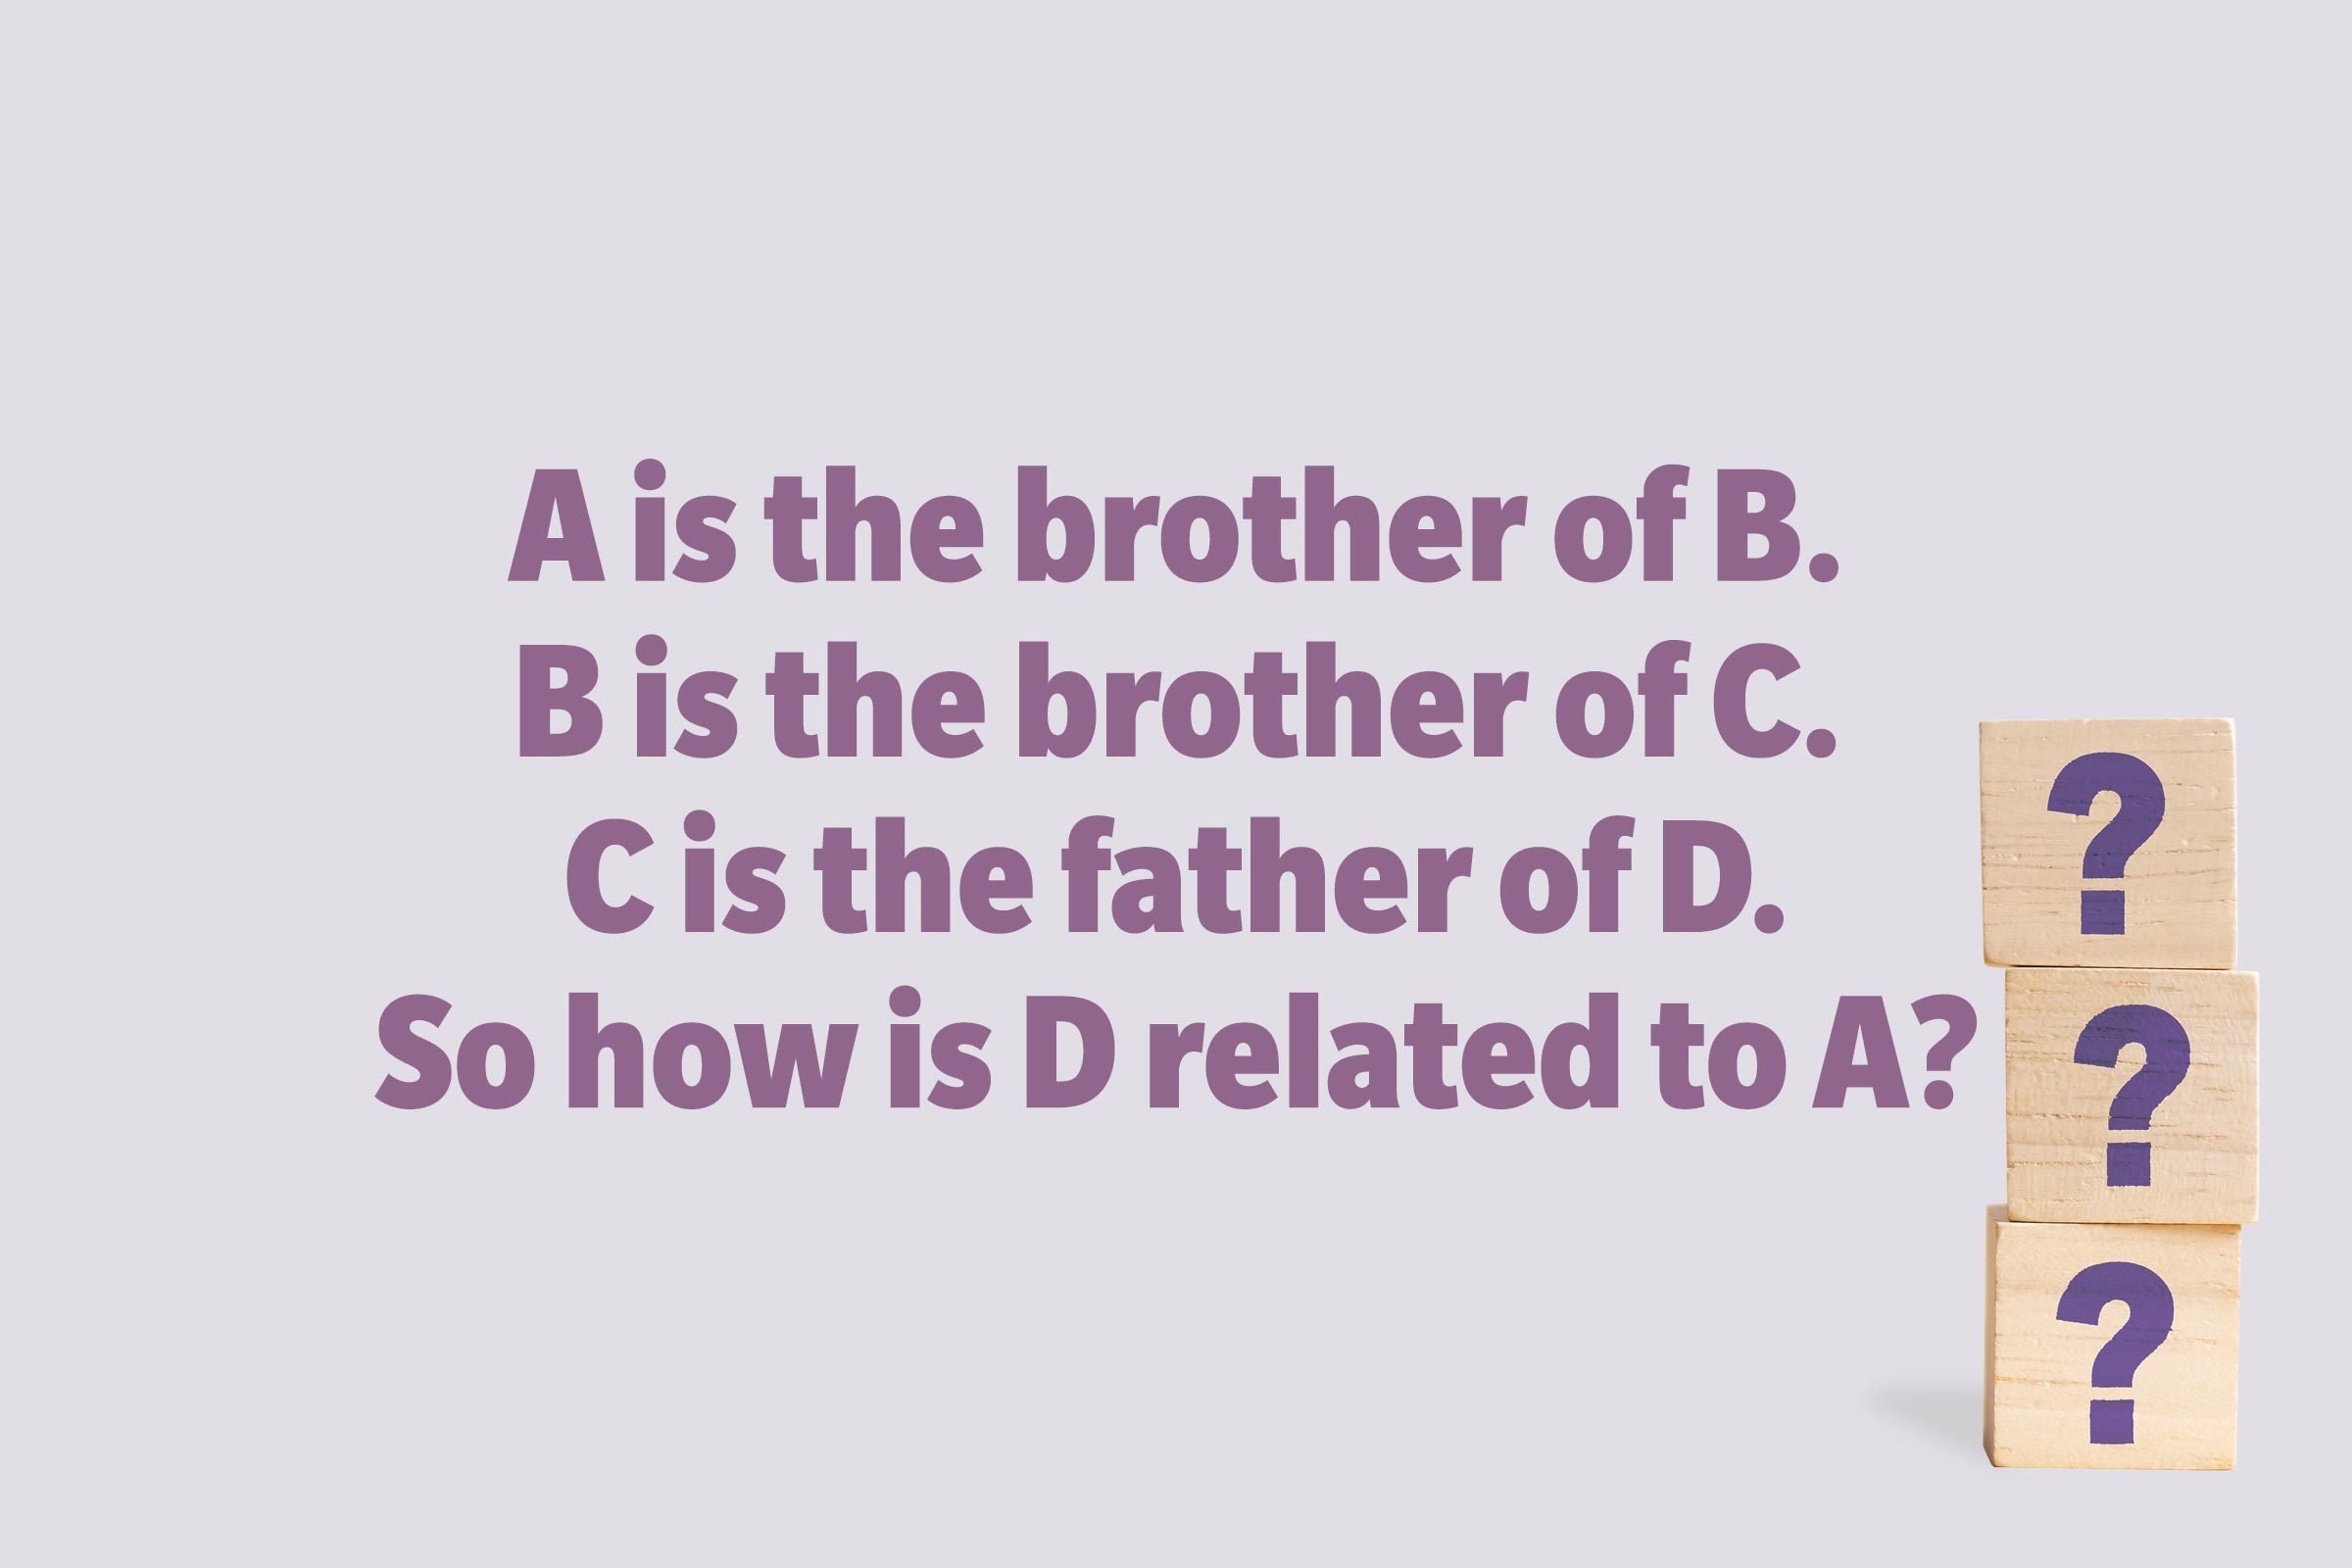 A is the brother of B. B is the brother of C. C is the father of D. So how is D related to A?